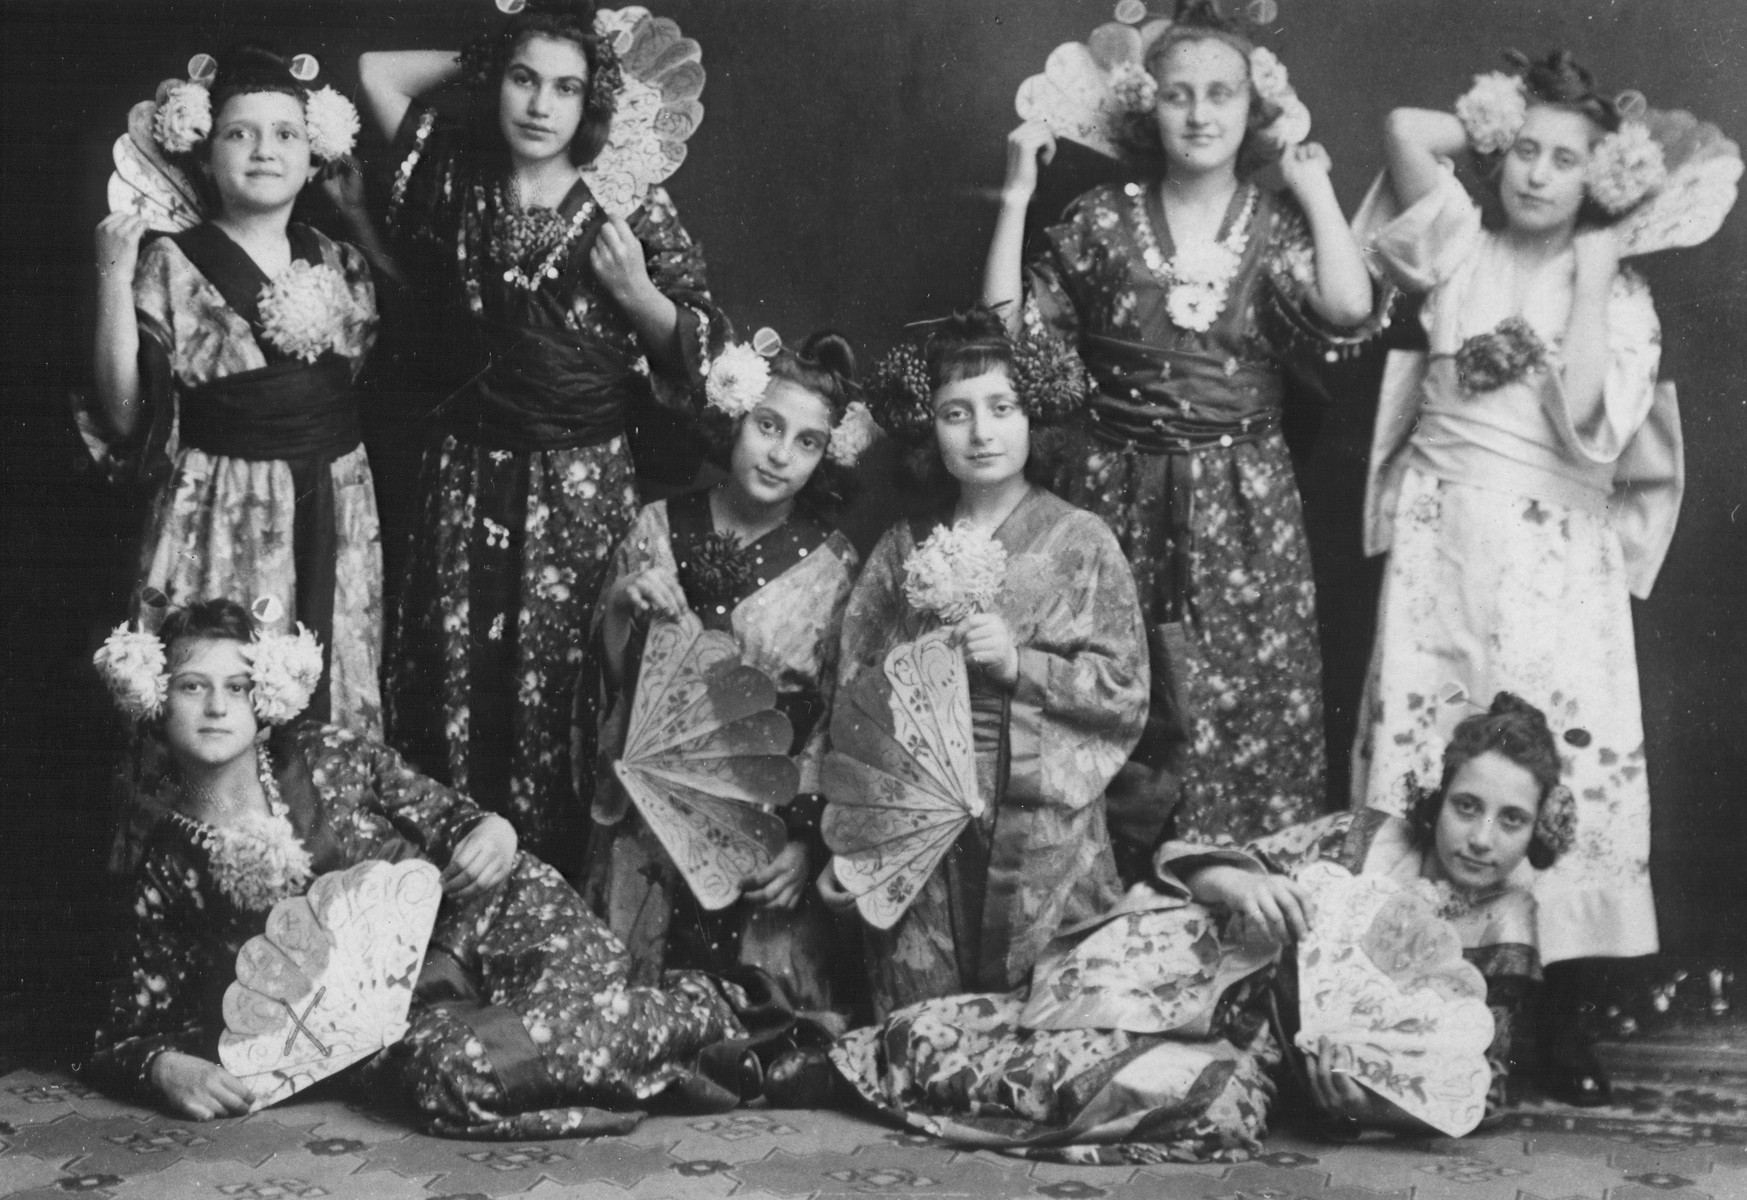 School girls pose wearing Japanese costumes and holding decorative fans.

Lili Koenig is on the bottom left.